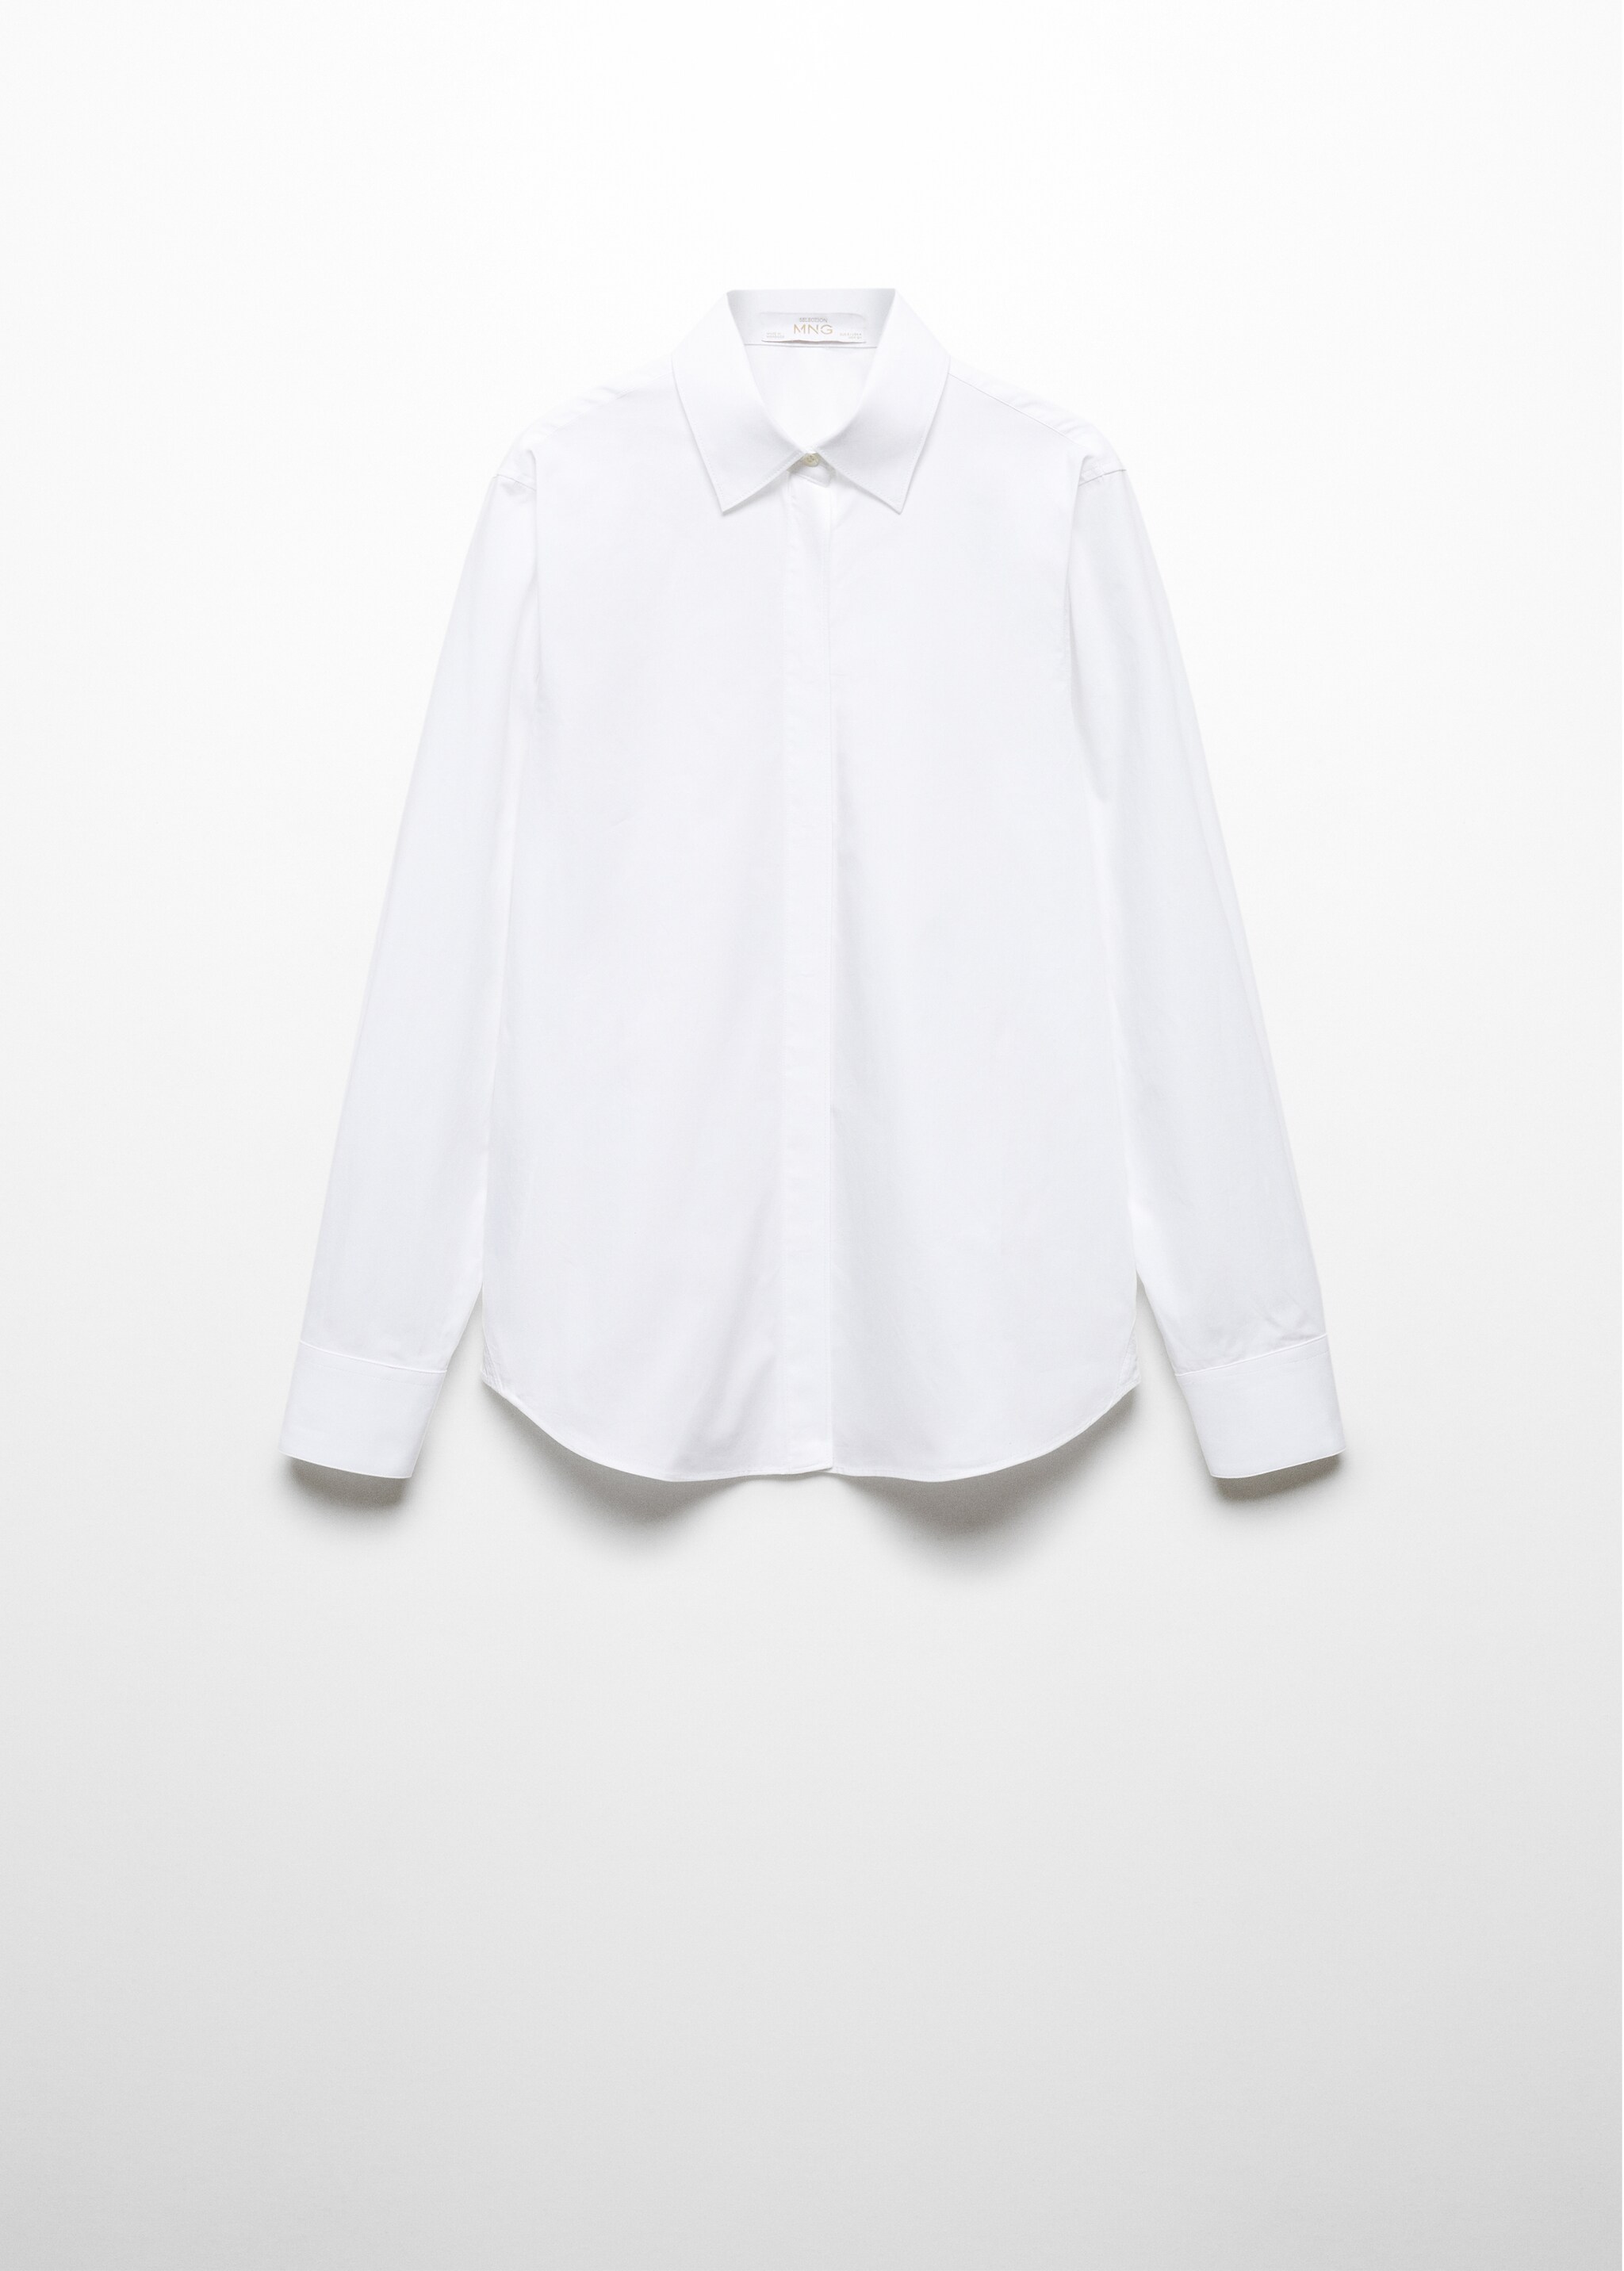 Cotton shirt with hidden buttons  - Article without model